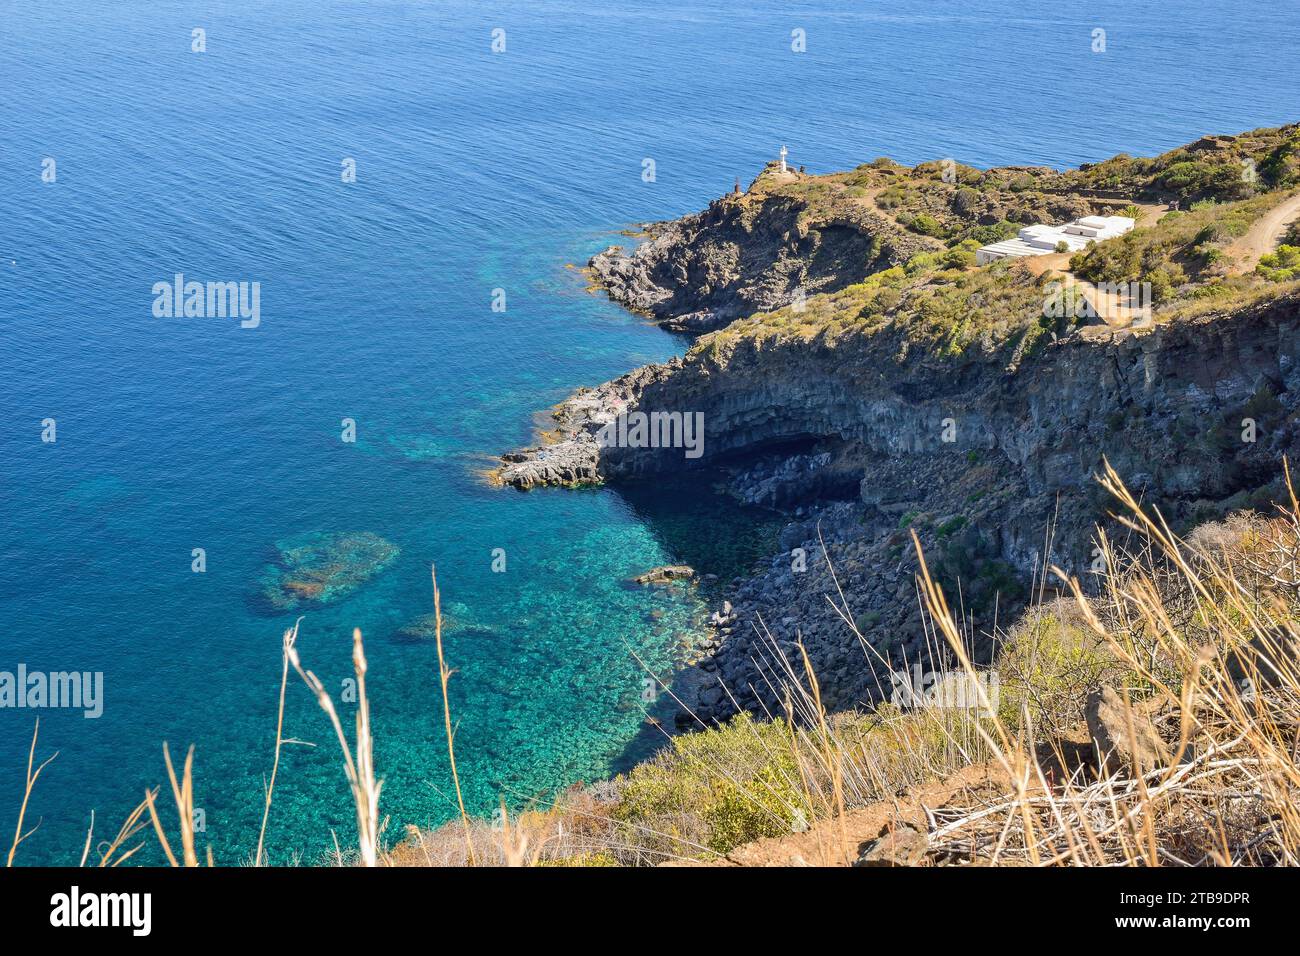 Panoramic view on Punta Limarsi with the lighthouse on the promontory, Pantelleria Stock Photo